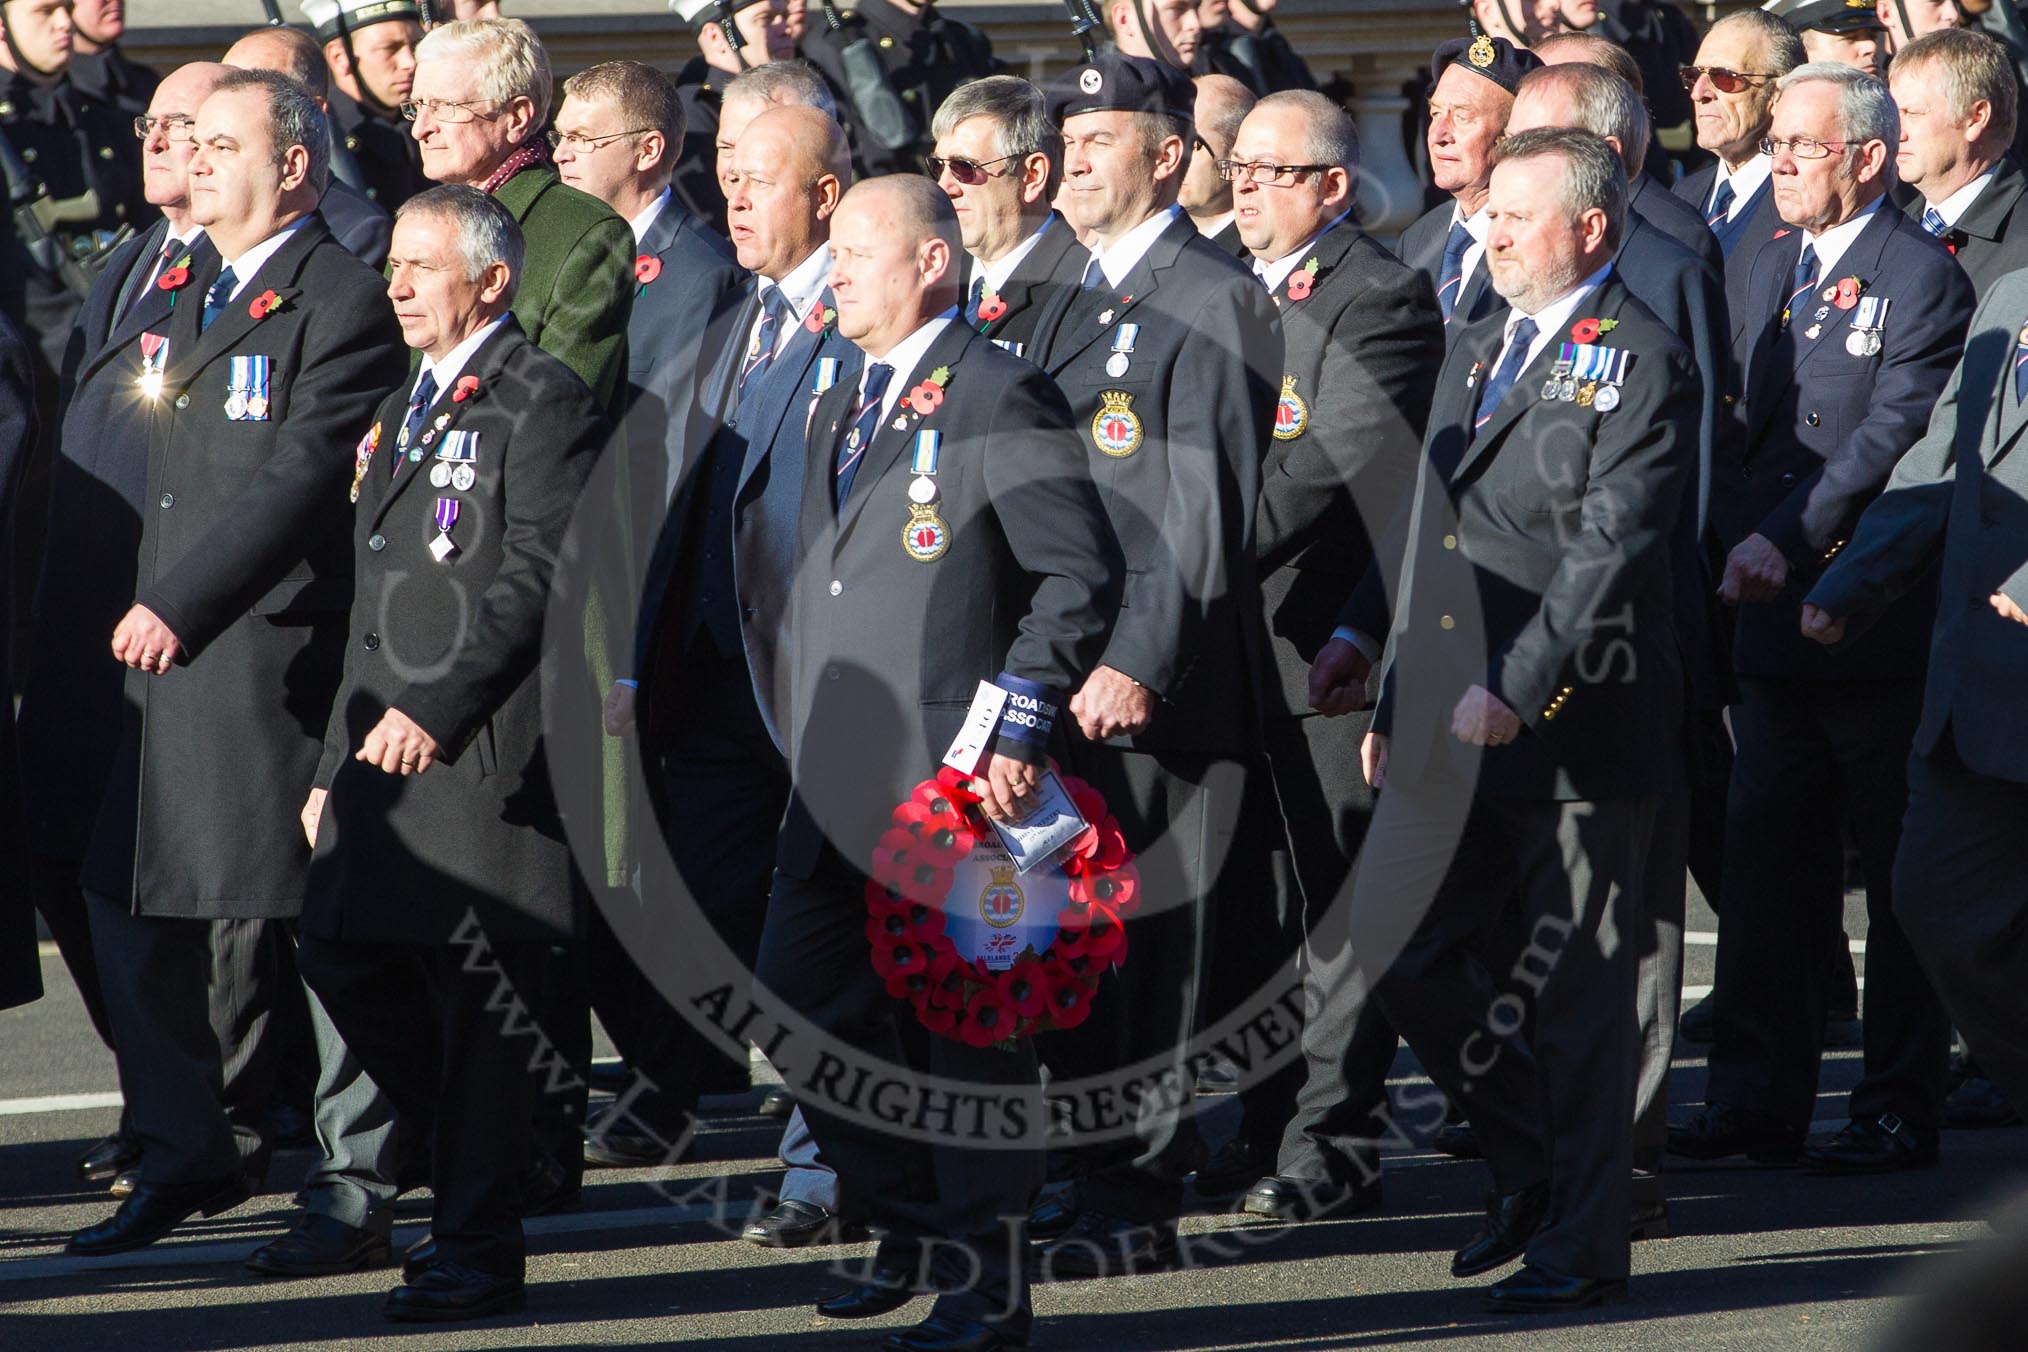 Remembrance Sunday 2012 Cenotaph March Past: Group E40 - Broadsword Association..
Whitehall, Cenotaph,
London SW1,

United Kingdom,
on 11 November 2012 at 11:42, image #290